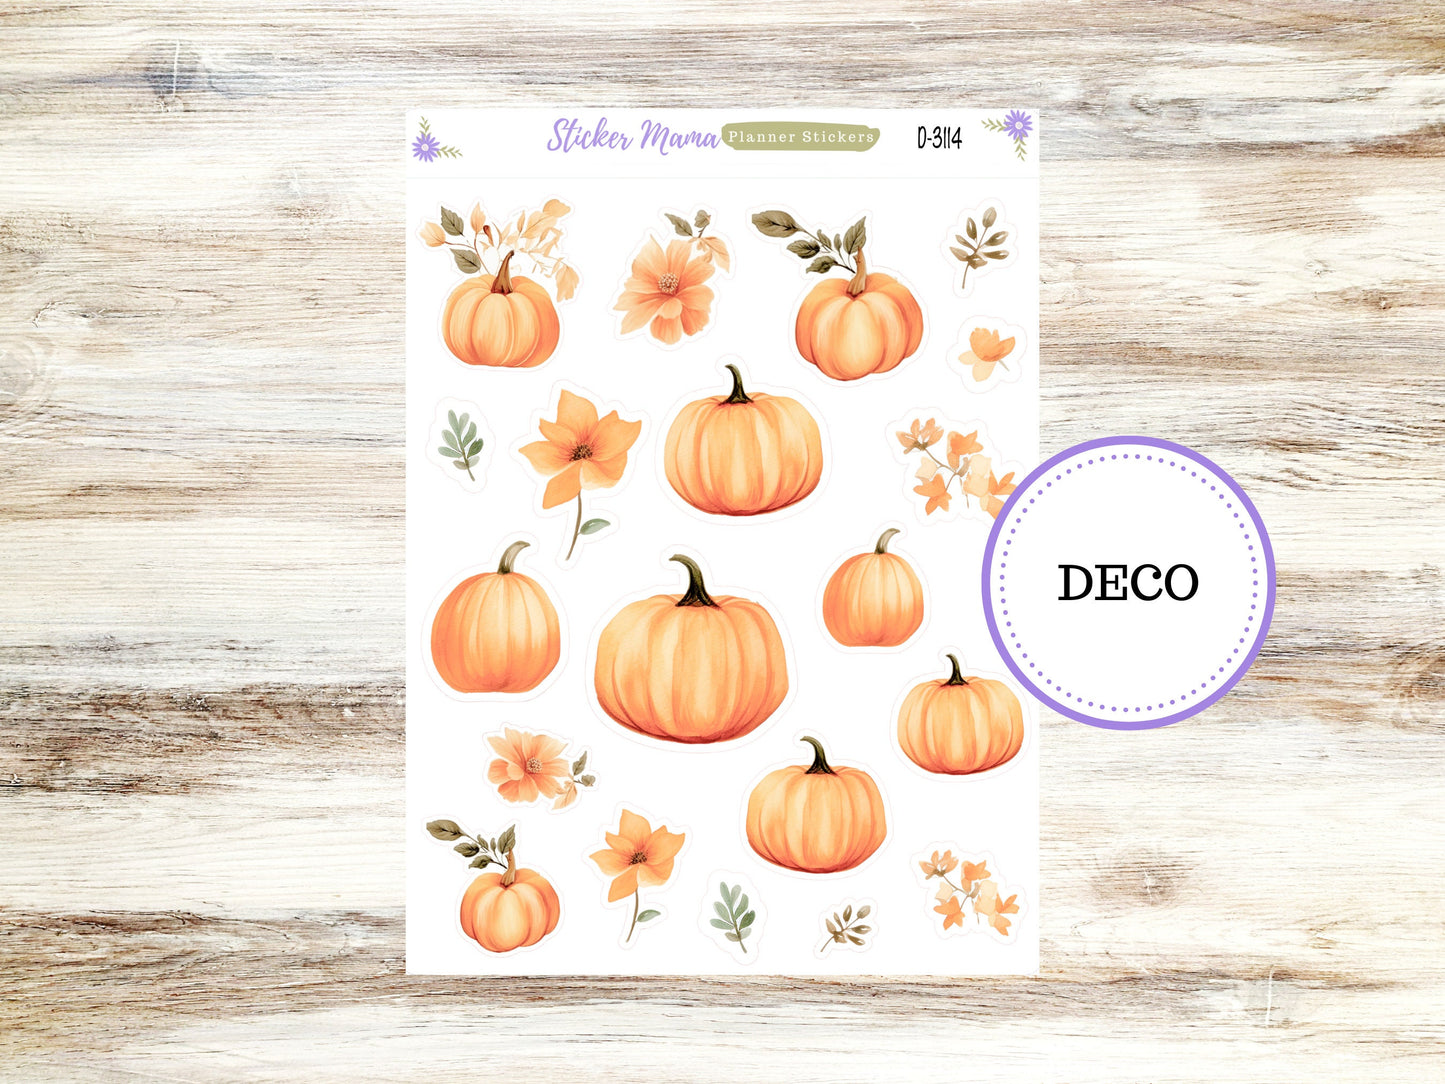 DECO-3114 || Pumpkin Paradise Deco || PLANNER STICKERS || Fall Stickers ||